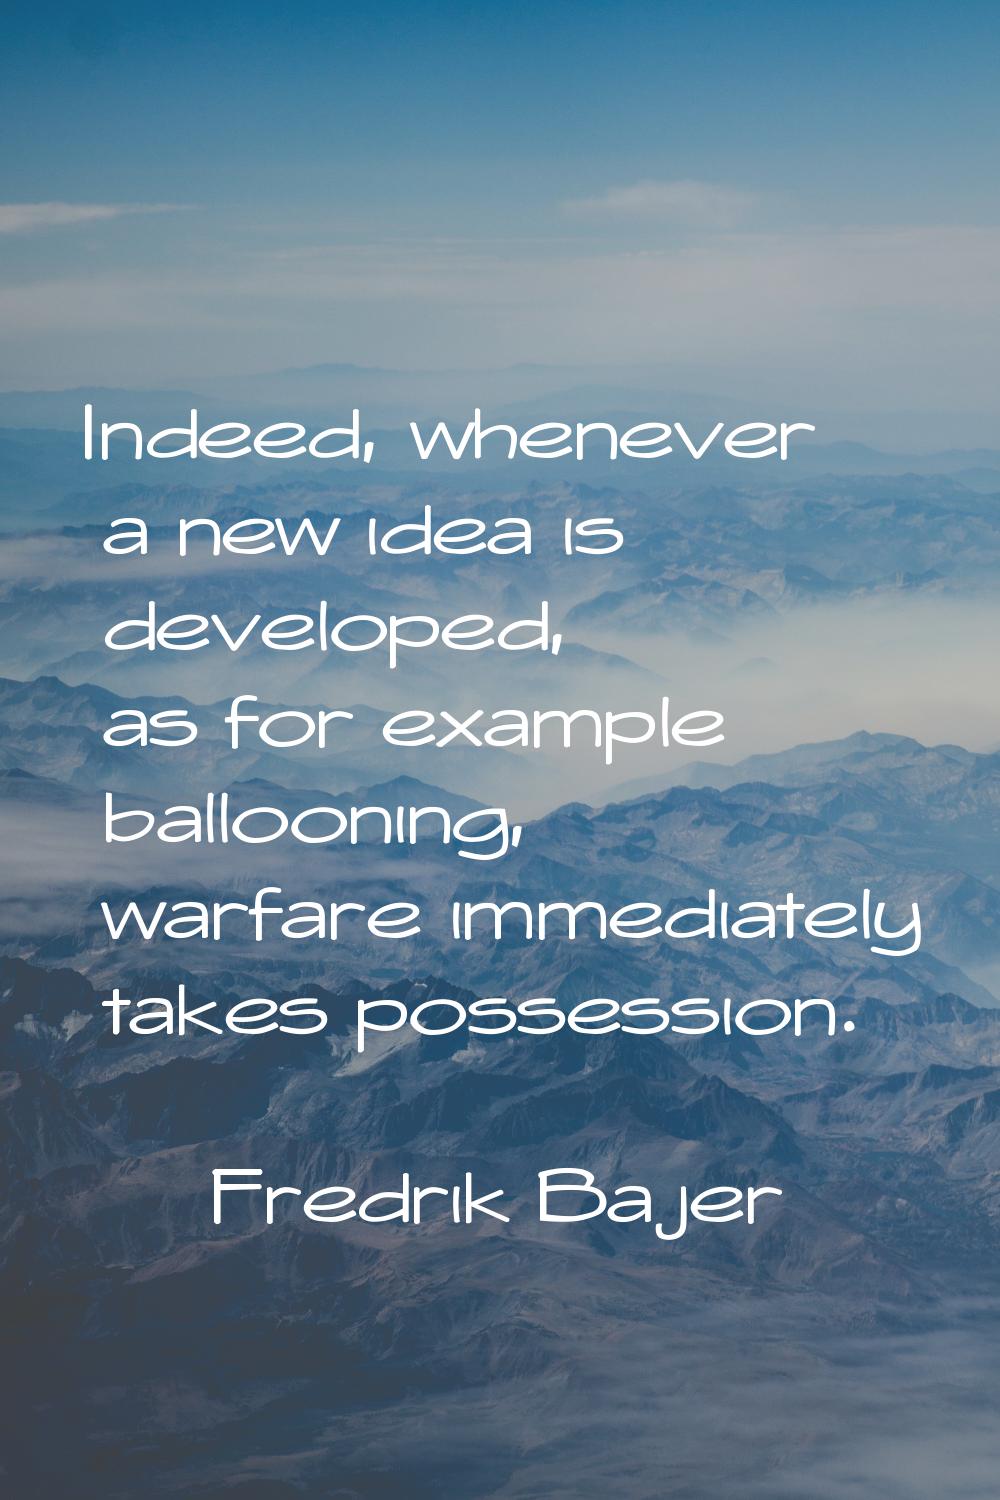 Indeed, whenever a new idea is developed, as for example ballooning, warfare immediately takes poss